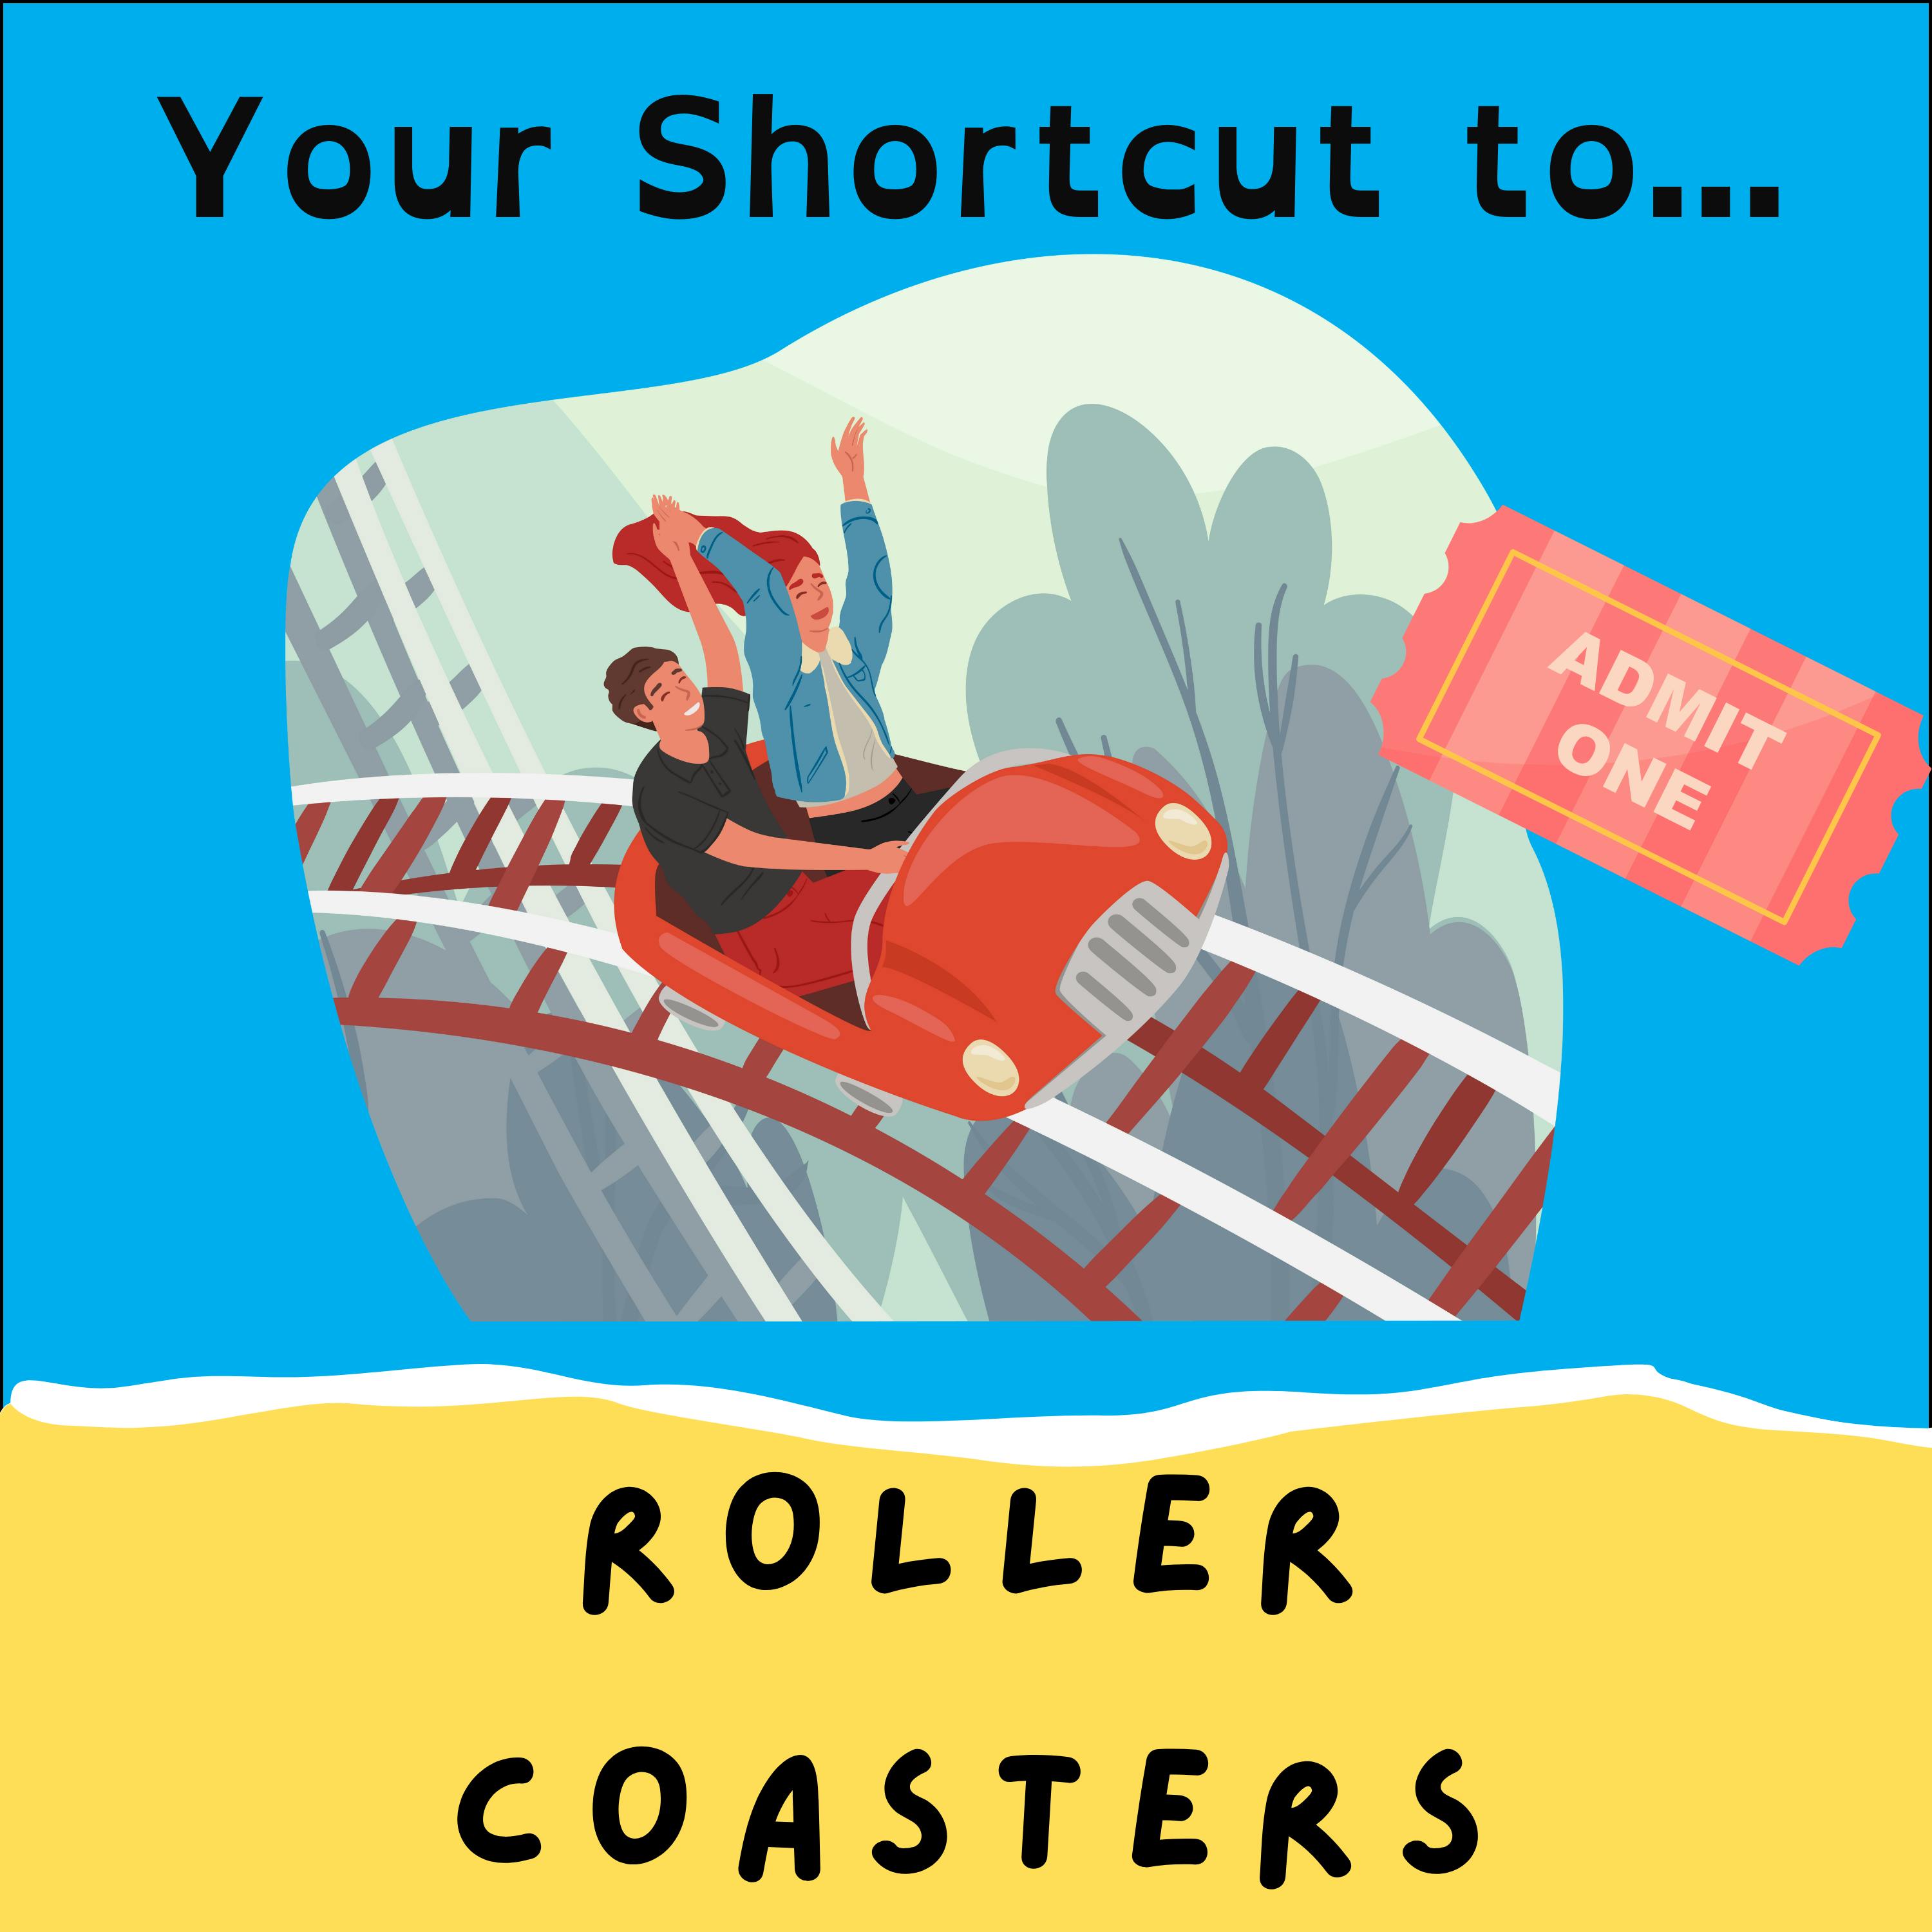 Your Shortcut to... Rollercoasters